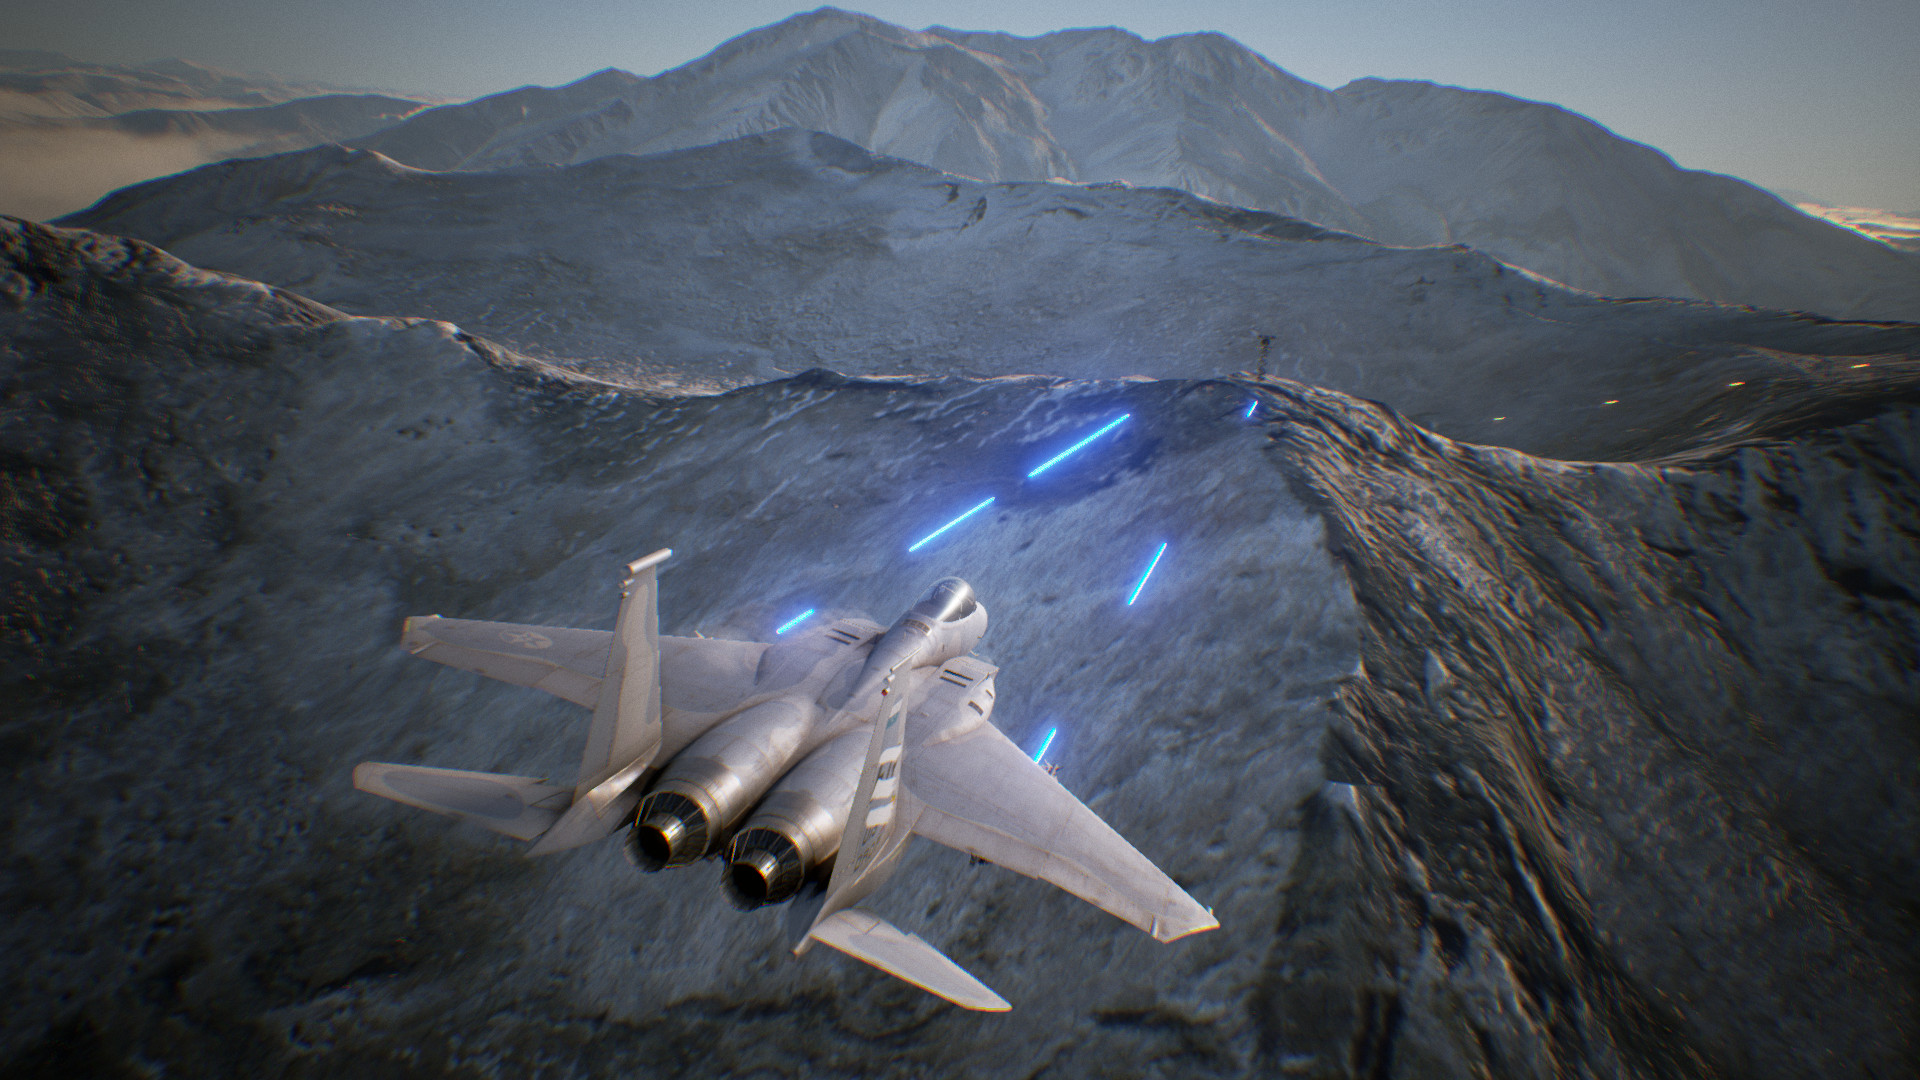 ACE COMBAT™ 7: SKIES UNKNOWN on Steam